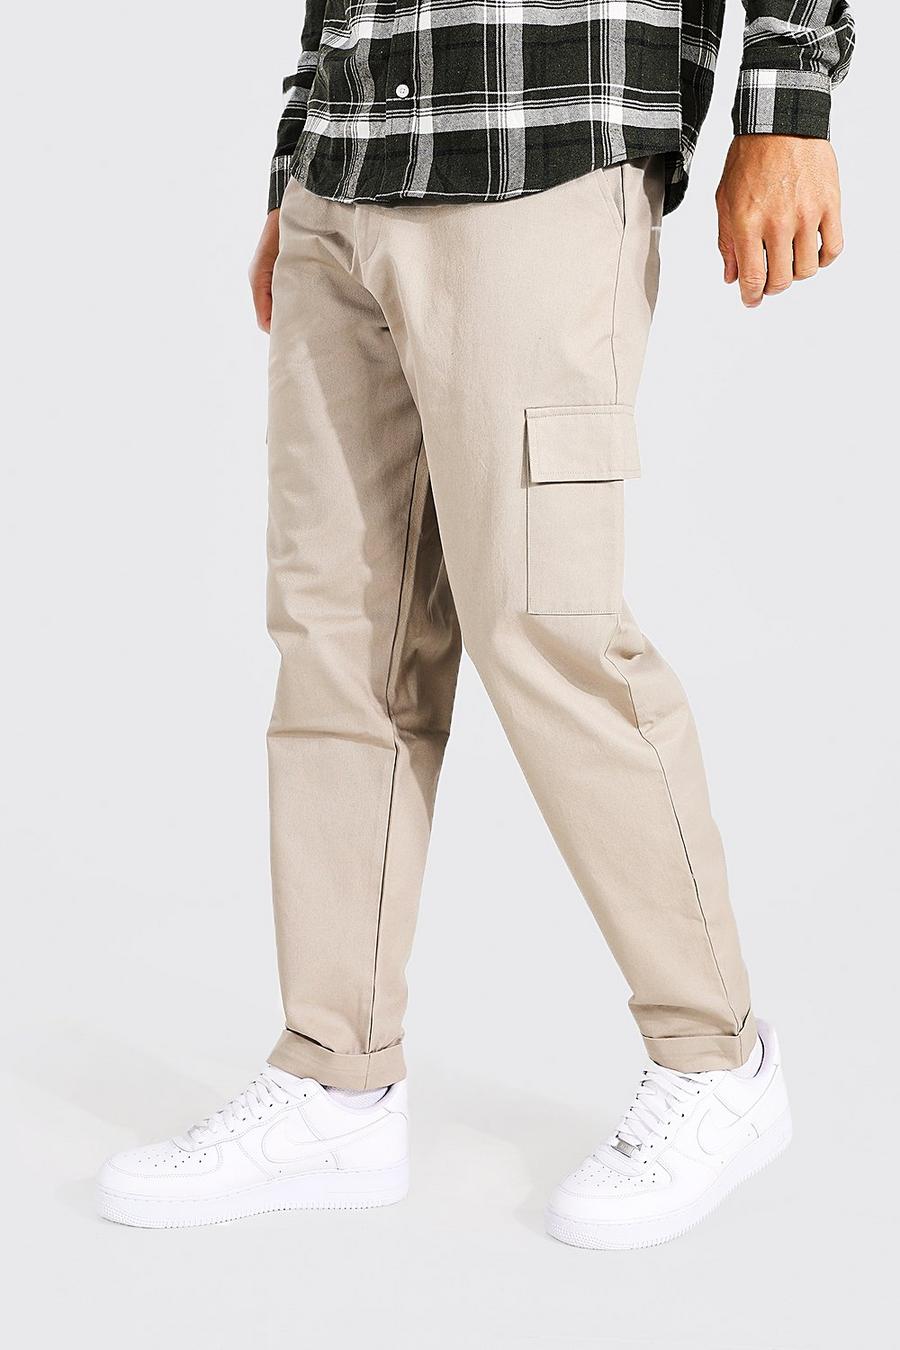 Natural Boohoo Tall Cargo Pants in Stone Slacks and Chinos Cargo trousers Womens Clothing Trousers 